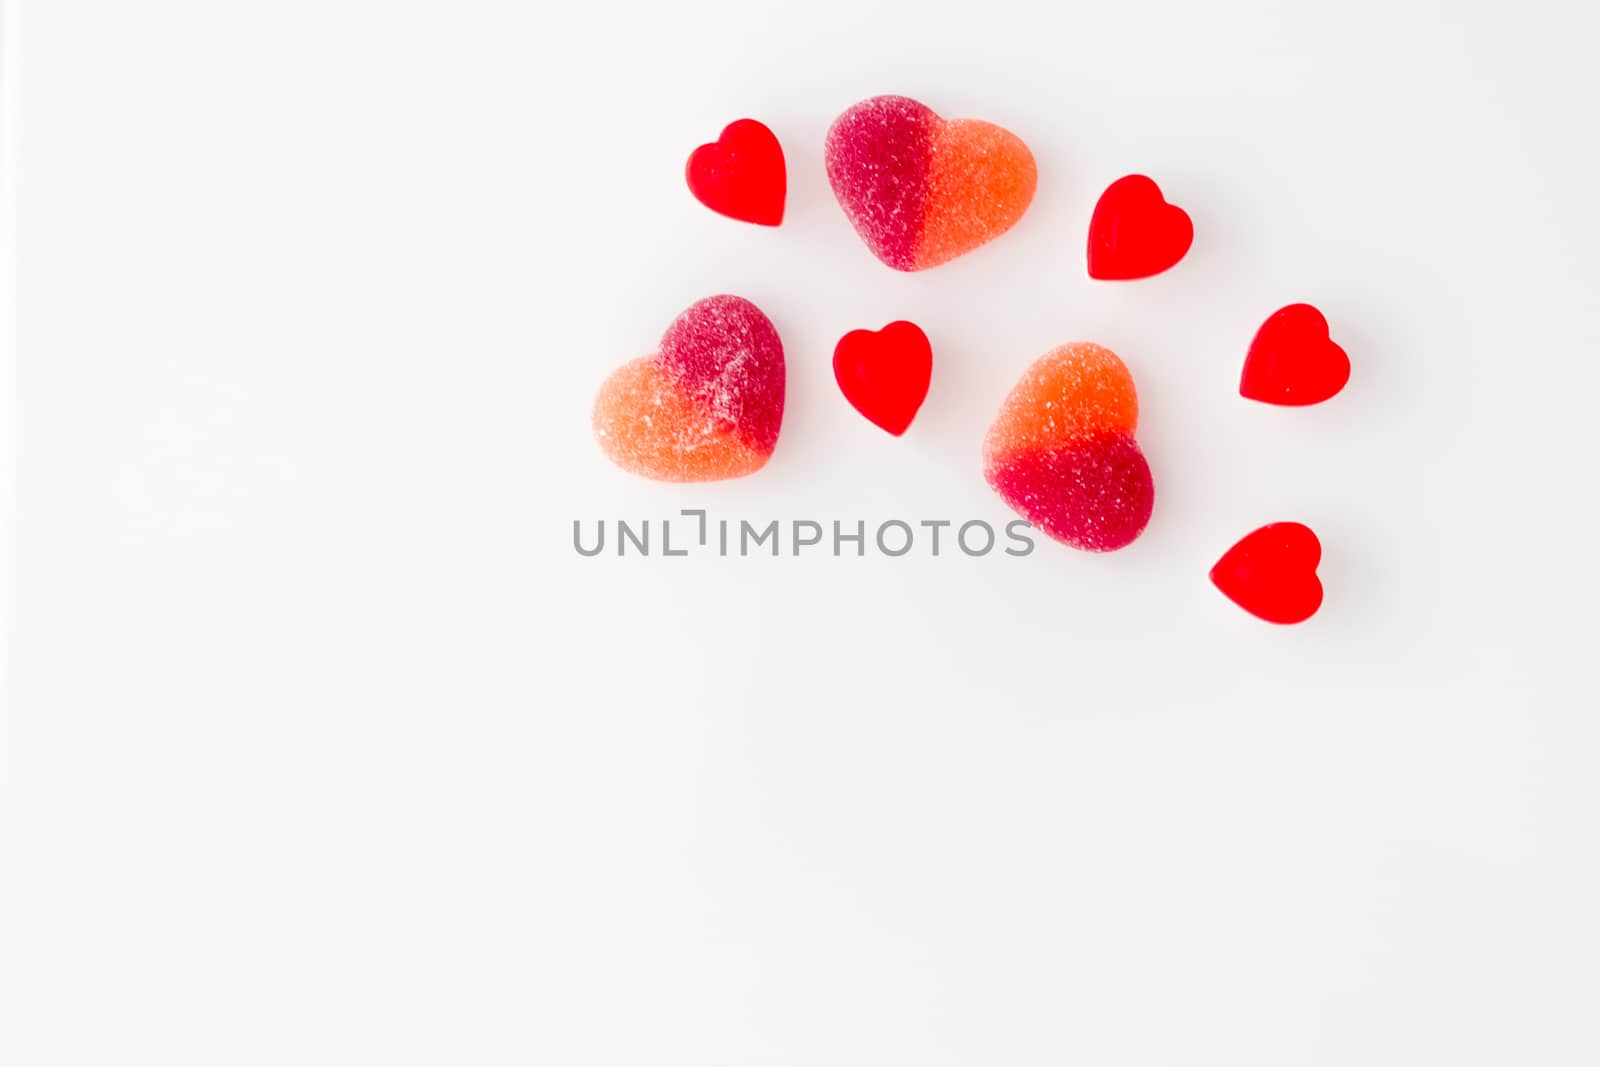 candy from marmalade in the form of red hearts by alexandr_sorokin